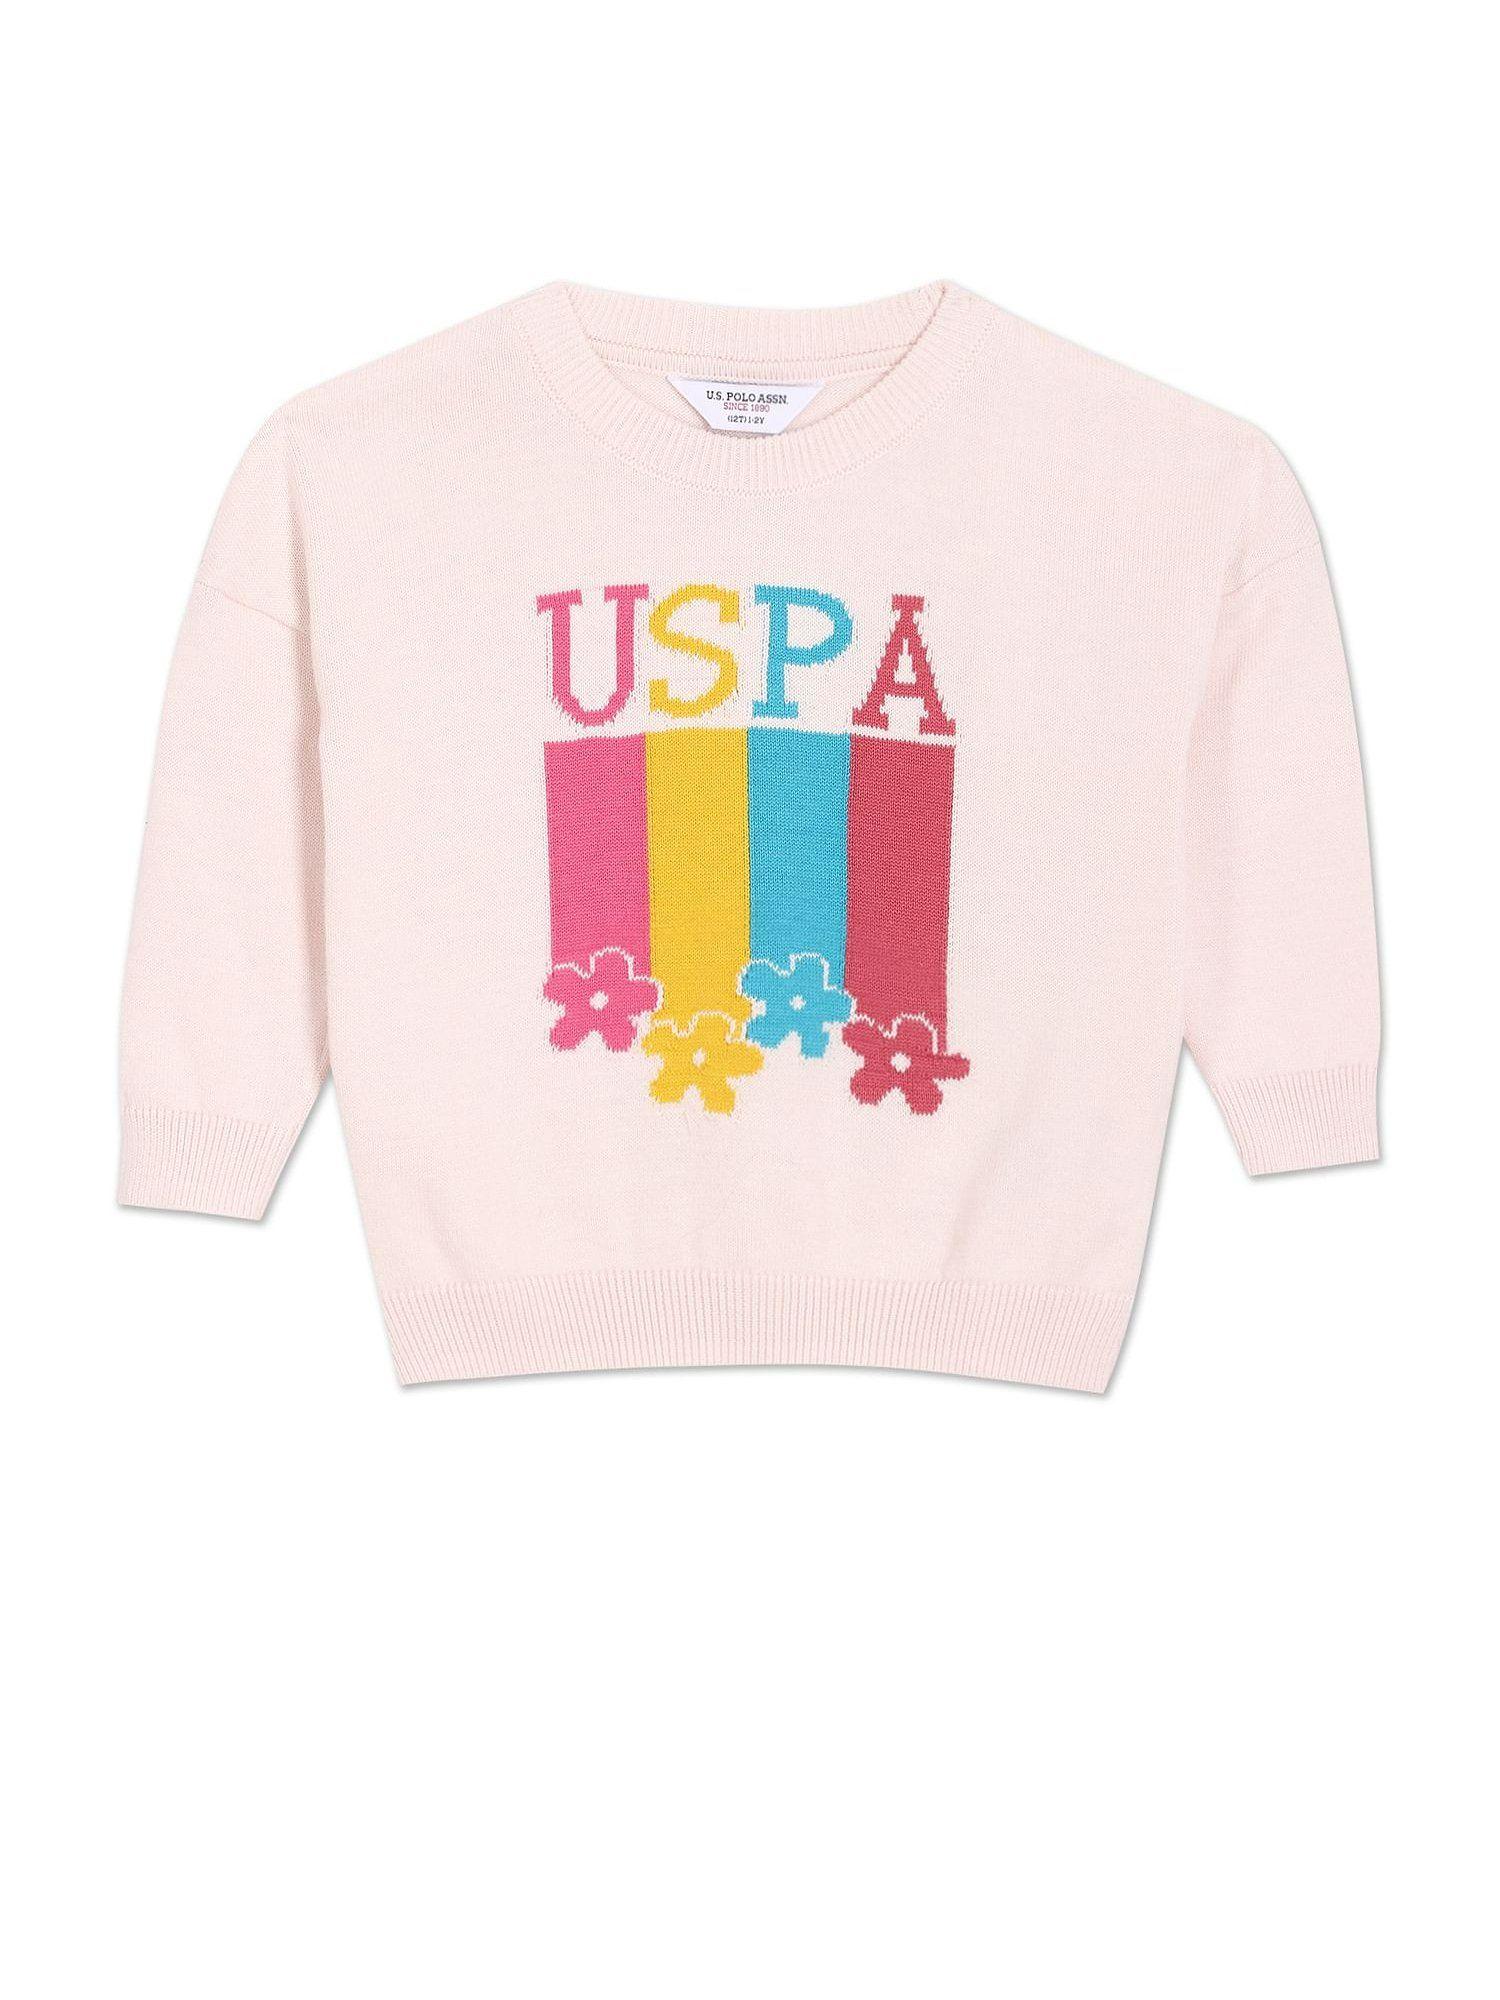 girls peach crew neck patterned knit cotton sweater